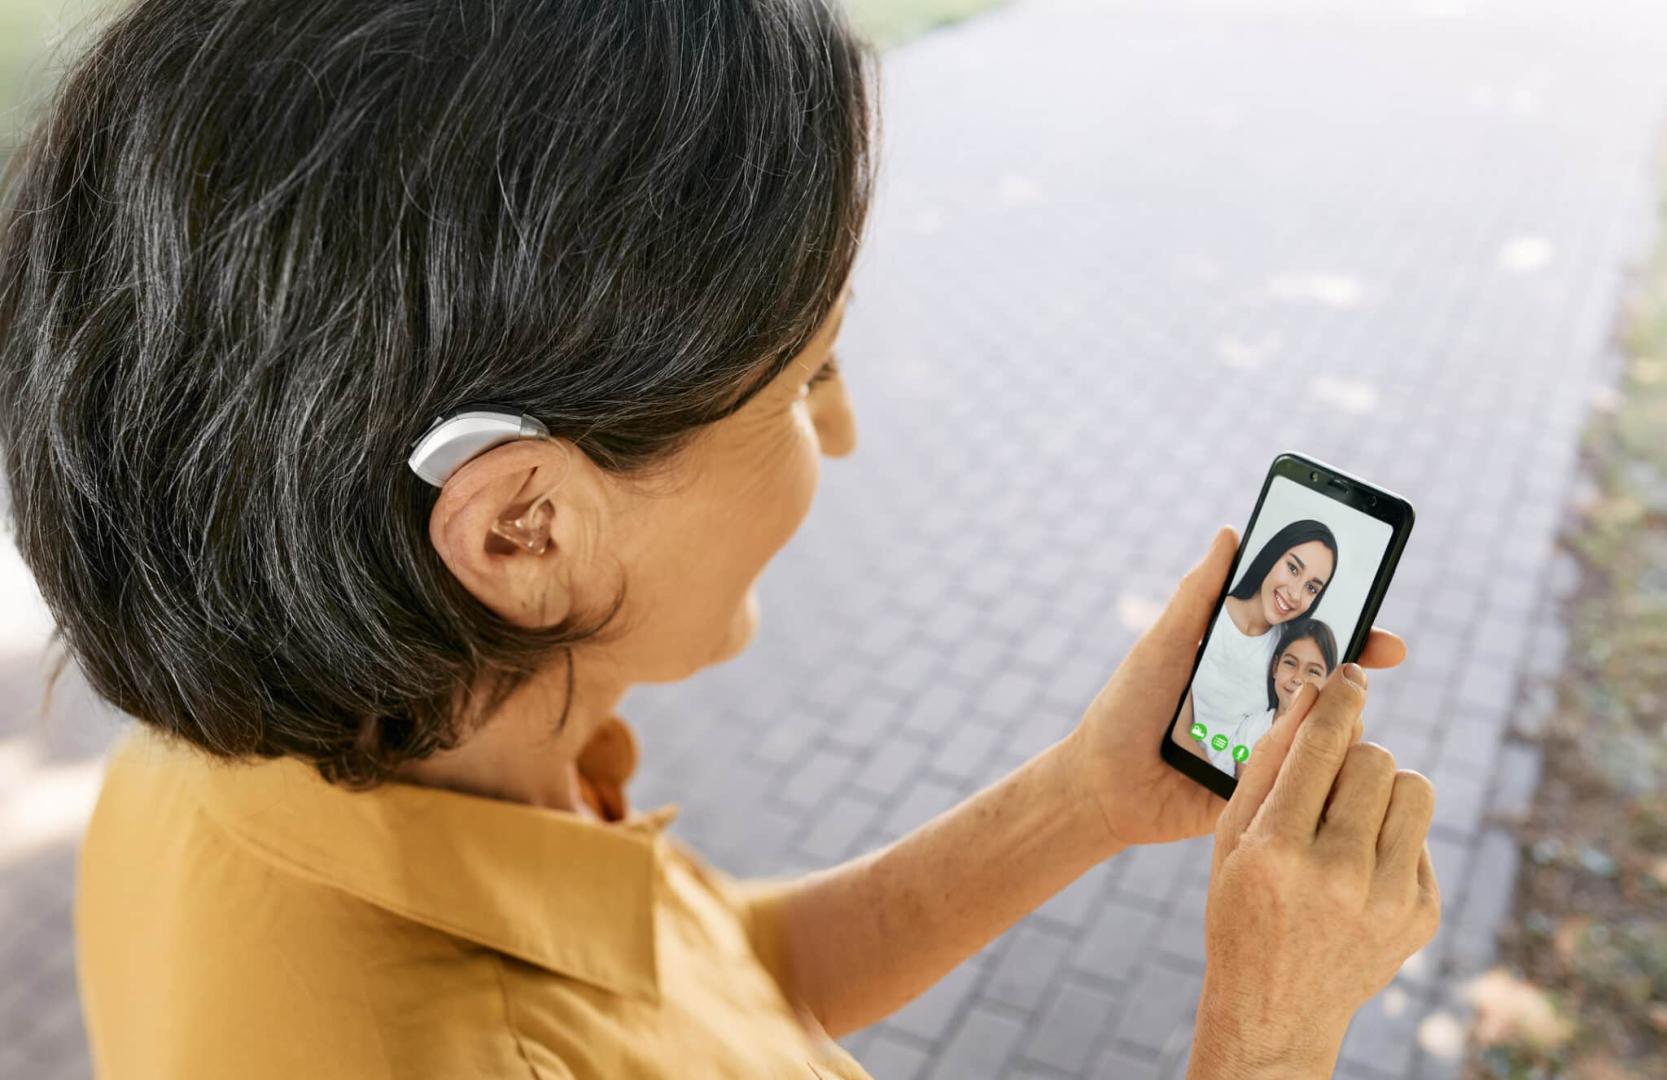 Senior woman with a hearing aid behind the ear communicates with her daughter and granddaughter via video communication via a smartphone. Full human life with hearing aids